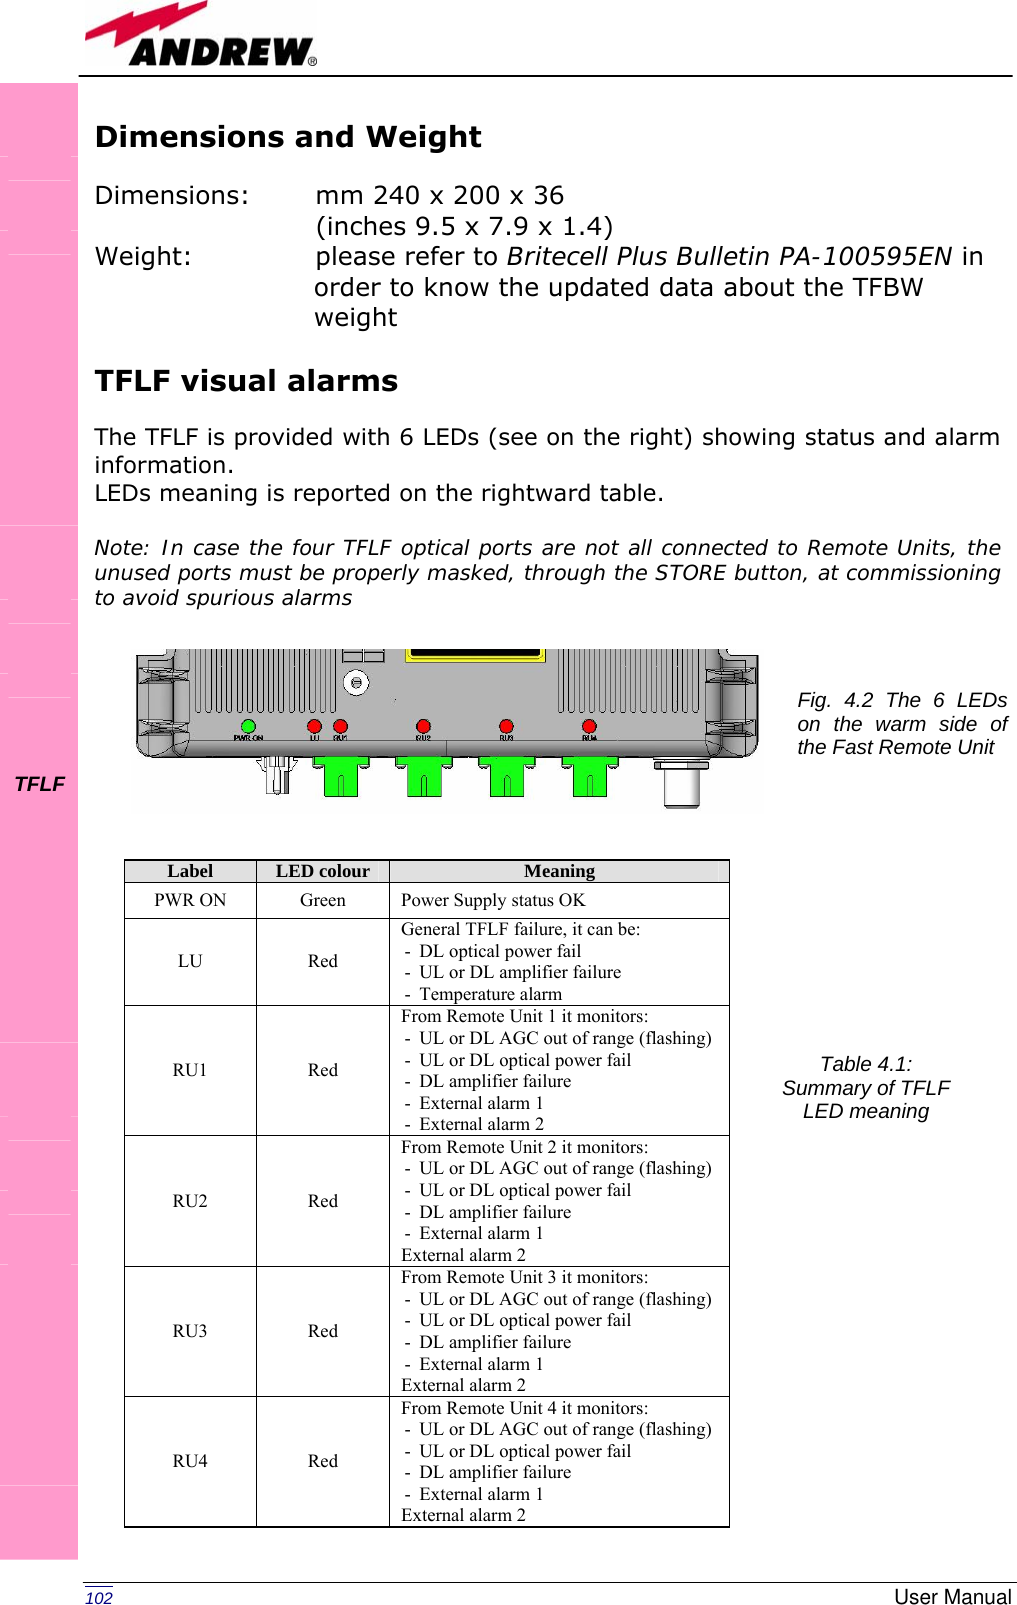   102  User ManualDimensions and Weight  Dimensions:  mm 240 x 200 x 36    (inches 9.5 x 7.9 x 1.4) Weight:     please refer to Britecell Plus Bulletin PA-100595EN in                           order to know the updated data about the TFBW                          weight  TFLF visual alarms  The TFLF is provided with 6 LEDs (see on the right) showing status and alarm information.  LEDs meaning is reported on the rightward table.  Note: In case the four TFLF optical ports are not all connected to Remote Units, the unused ports must be properly masked, through the STORE button, at commissioning to avoid spurious alarms                                         TFLF           Label  LED colour  Meaning PWR ON  Green  Power Supply status OK LU Red General TFLF failure, it can be: - DL optical power fail - UL or DL amplifier failure - Temperature alarm RU1 Red From Remote Unit 1 it monitors: - UL or DL AGC out of range (flashing) - UL or DL optical power fail - DL amplifier failure - External alarm 1 - External alarm 2 RU2 Red From Remote Unit 2 it monitors: - UL or DL AGC out of range (flashing) - UL or DL optical power fail - DL amplifier failure - External alarm 1 External alarm 2 RU3 Red From Remote Unit 3 it monitors: - UL or DL AGC out of range (flashing) - UL or DL optical power fail - DL amplifier failure - External alarm 1 External alarm 2 RU4 Red From Remote Unit 4 it monitors: - UL or DL AGC out of range (flashing) - UL or DL optical power fail - DL amplifier failure - External alarm 1 External alarm 2 Fig. 4.2 The 6 LEDs on the warm side of the Fast Remote Unit Table 4.1: Summary of TFLF LED meaning 